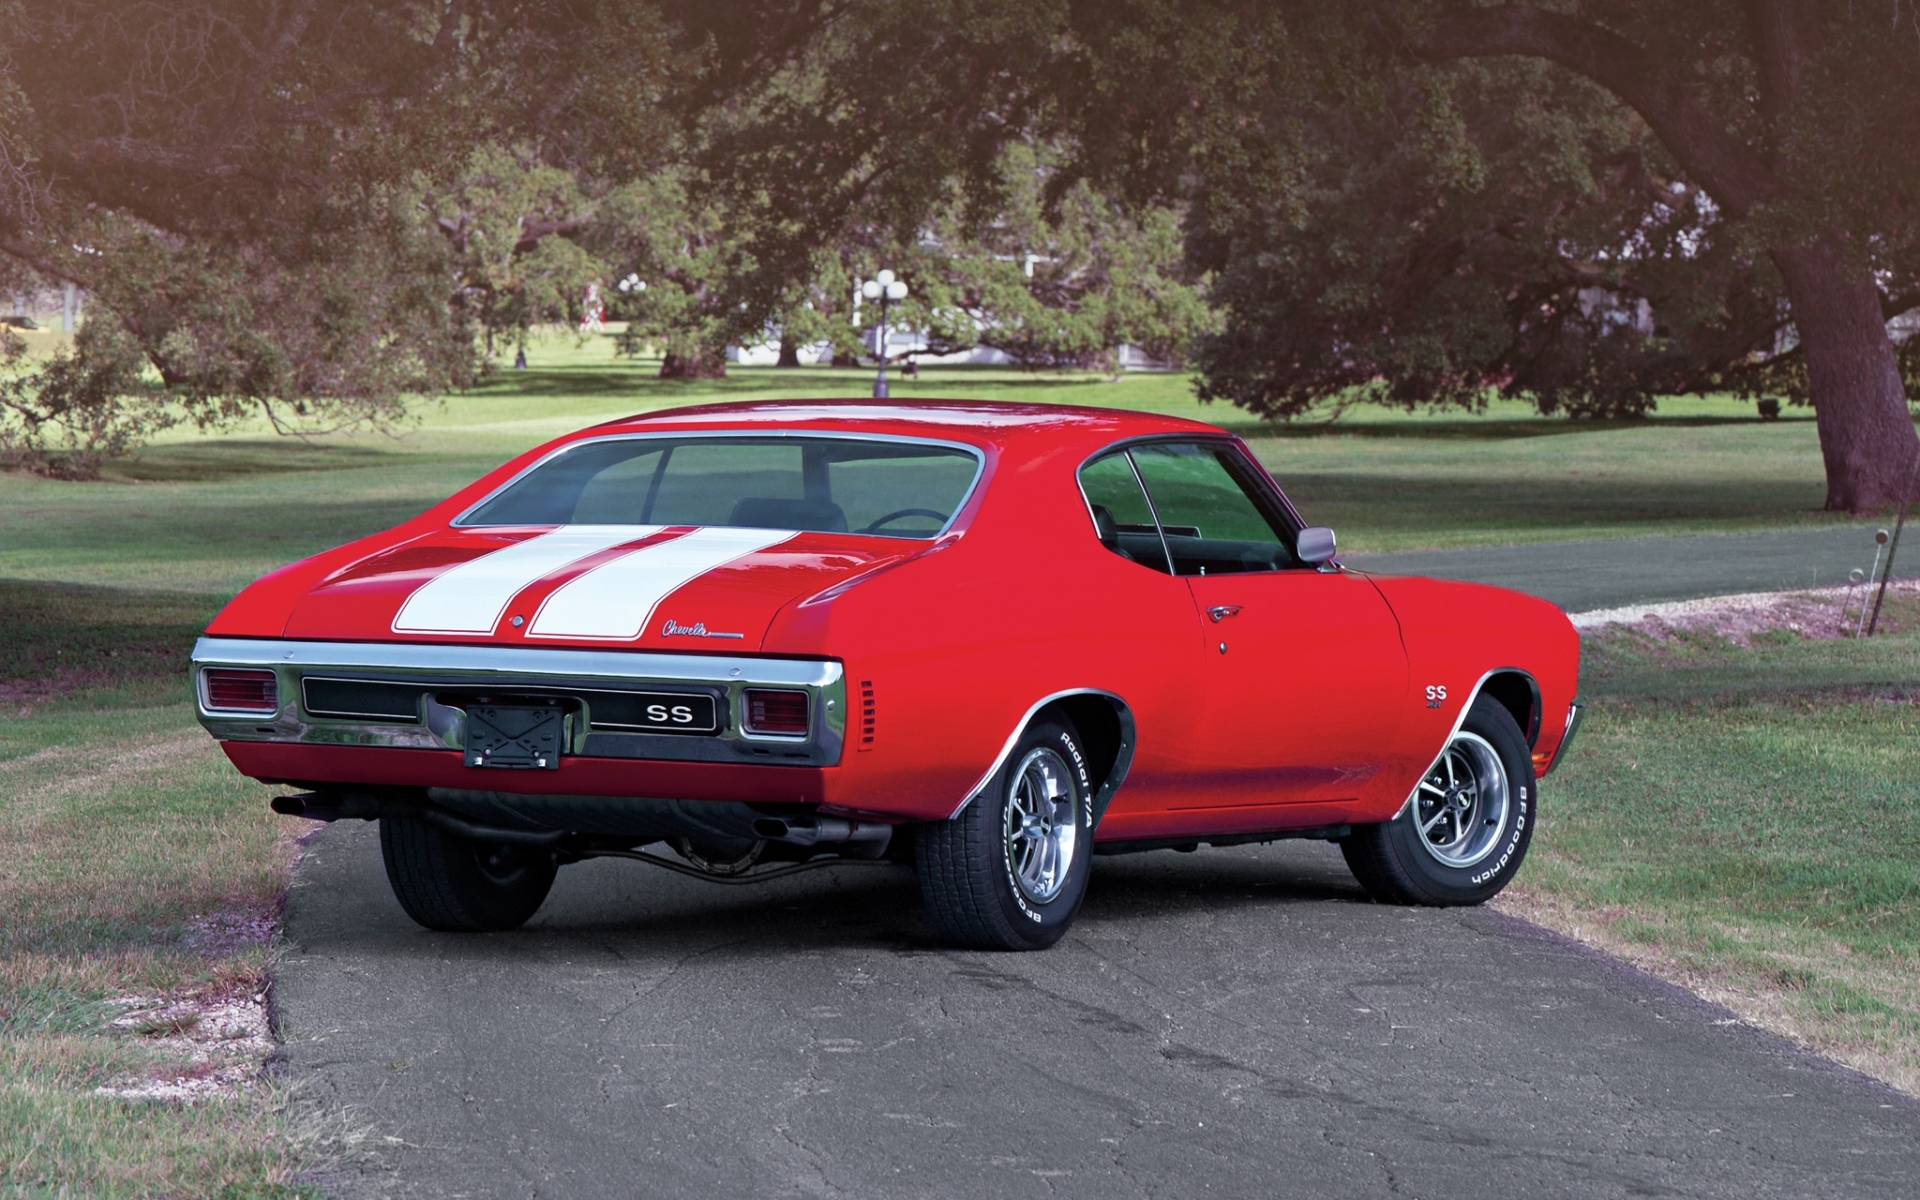 1970 Chevrolet Chevelle Ss 454 Coupe wallpaper   985292